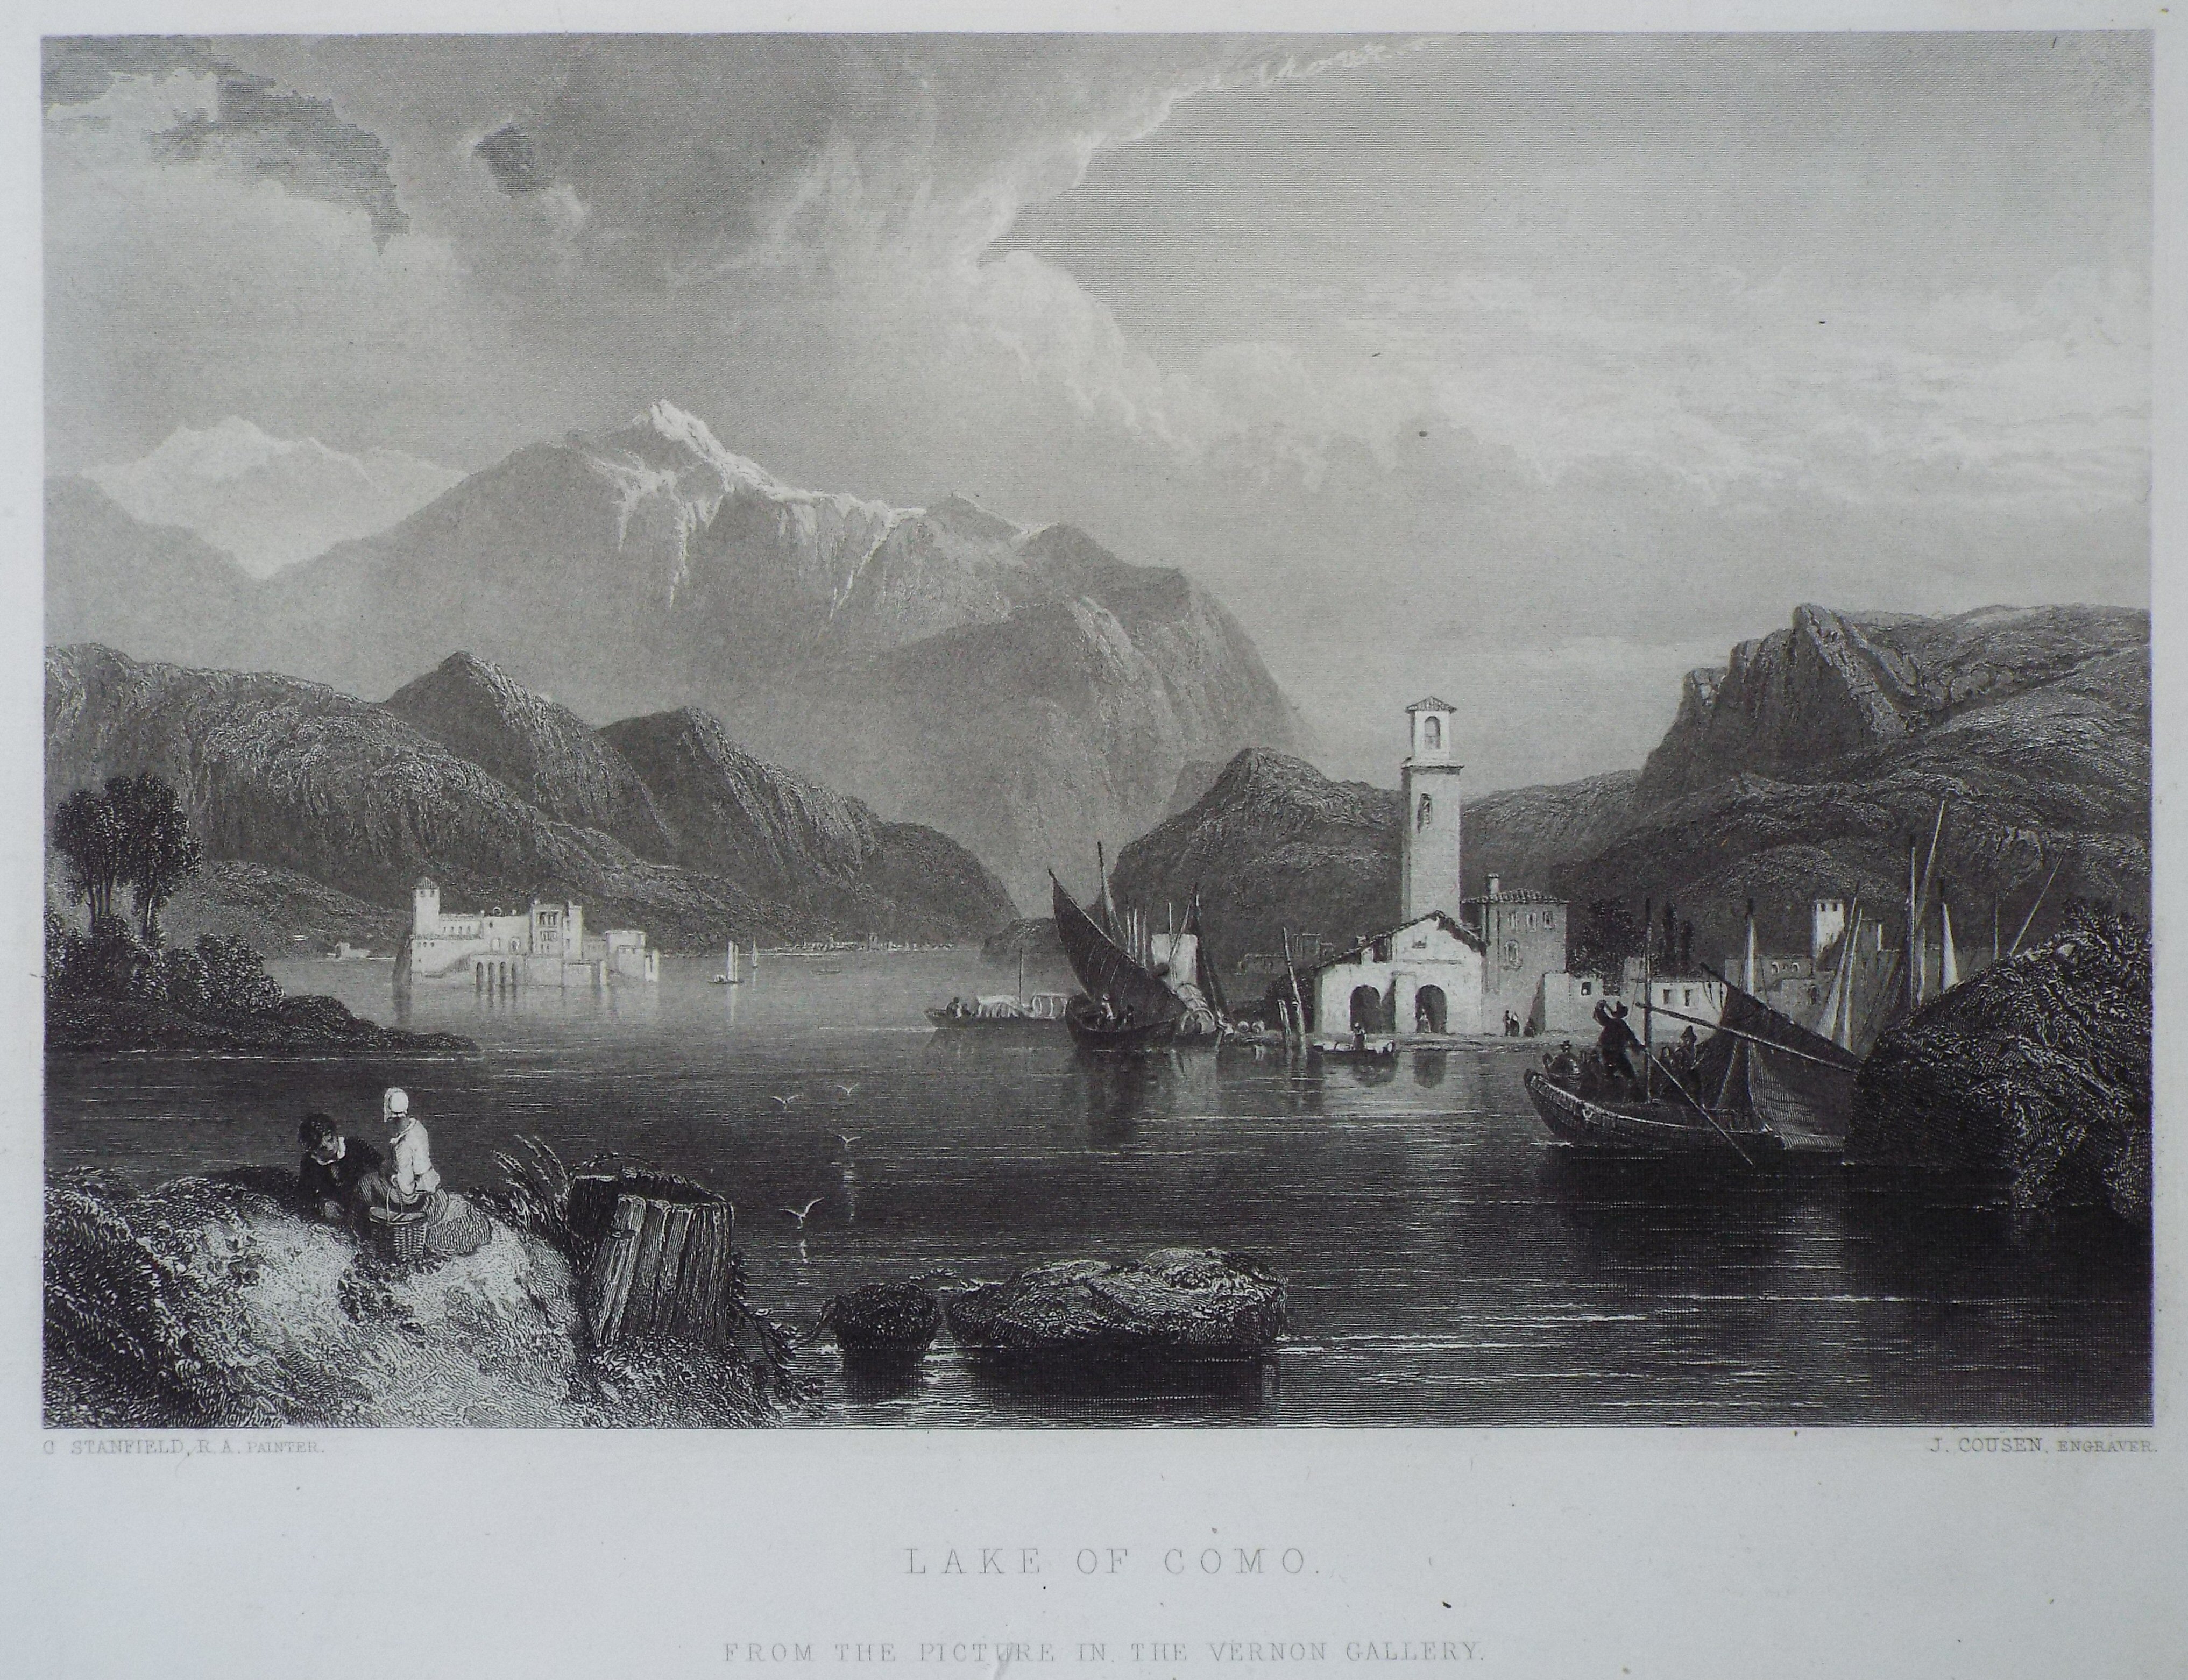 Print - Lake of Como from the Picture in the Vernon Gallery - Cousen